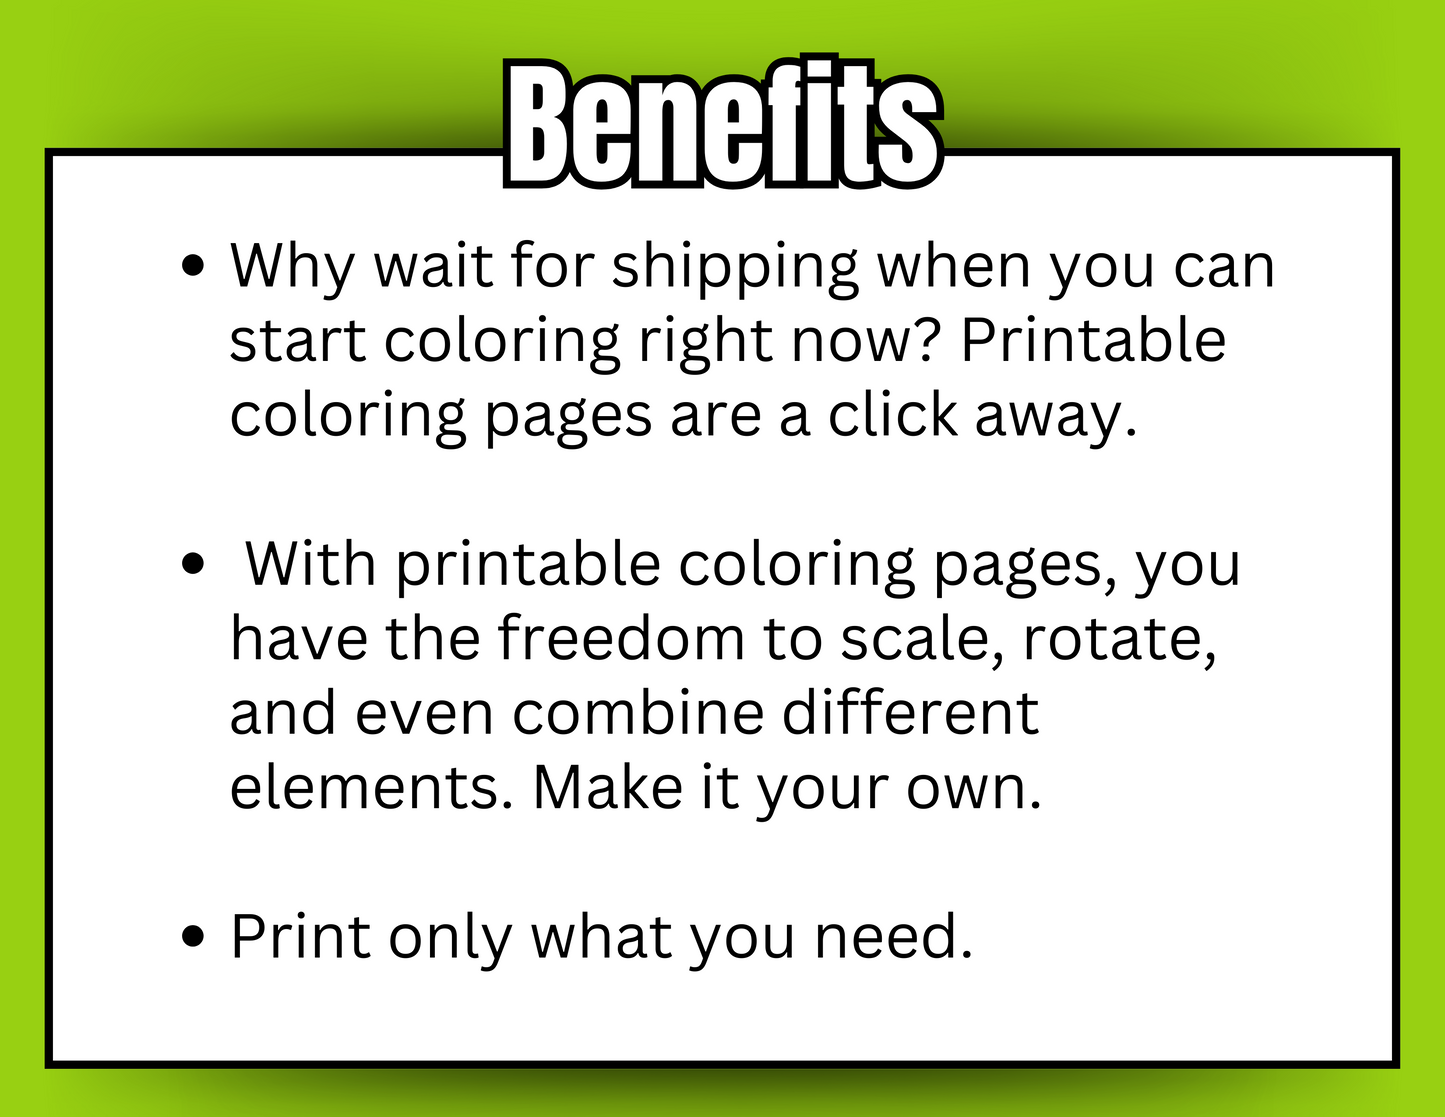 001-BKB | PLR Coloring Pages, Prompt and a Bot | Pre-Black Friday Special for Small Business Owners